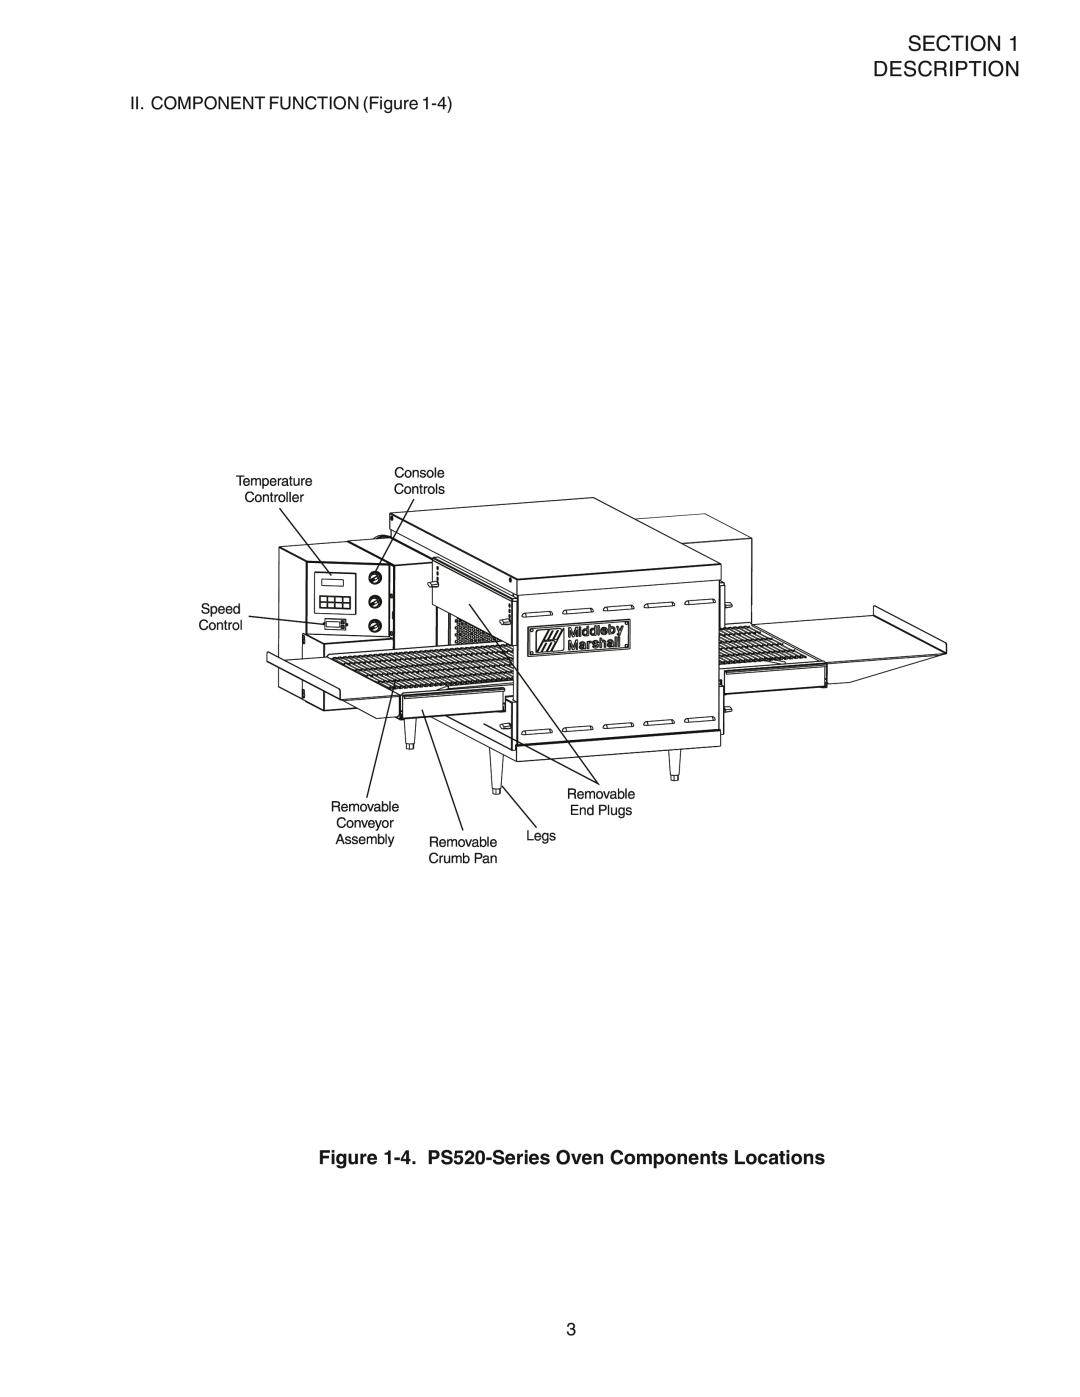 Middleby Marshall PS520G installation manual 4. PS520-SeriesOven Components Locations, II. COMPONENT FUNCTION Figure 